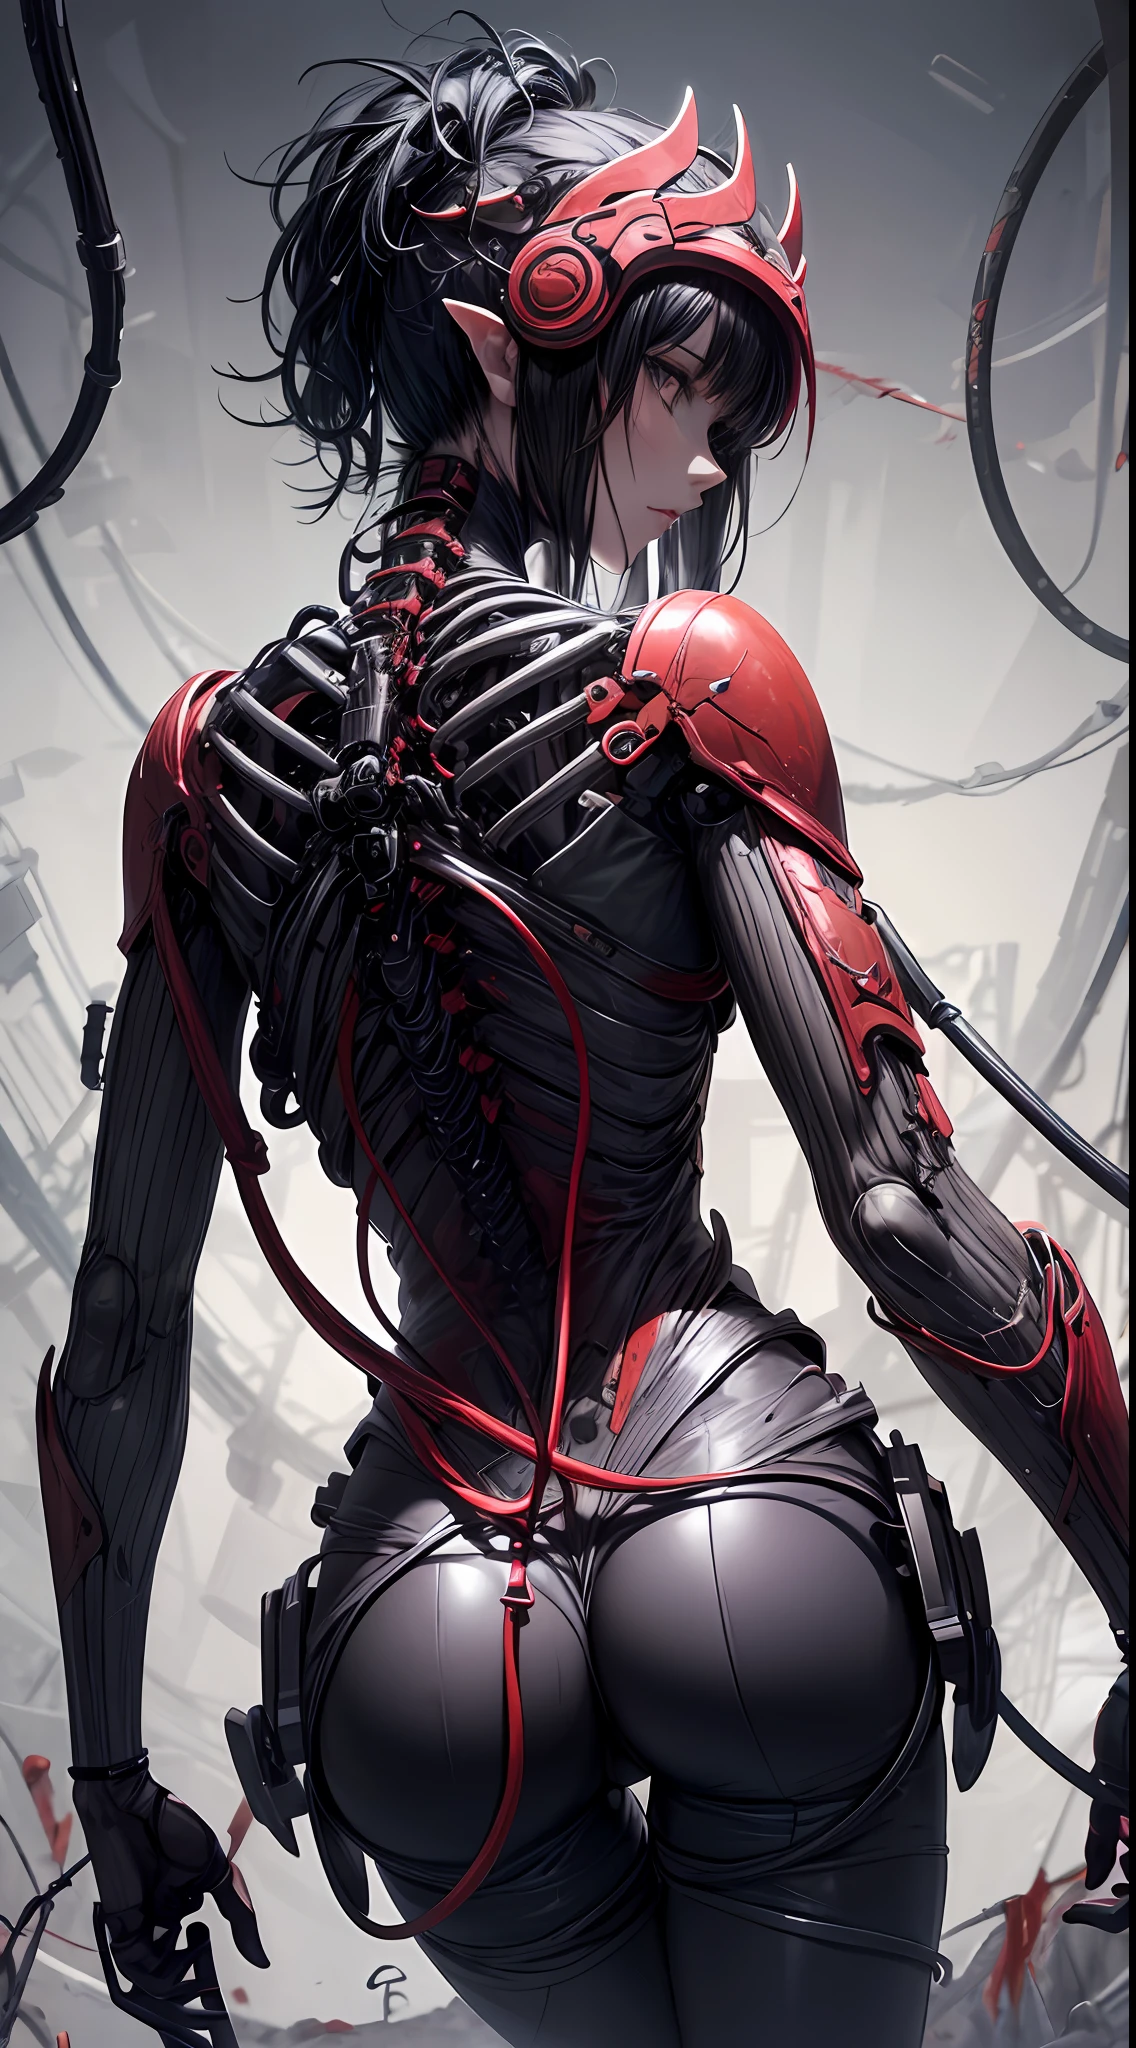 (((Masterpiece))), ((Best Quality)), (Super Detail), (CG Illustration), (Very Evil and Beautiful)), Cinematic Light, ((1 Mechanical Girl)), Single, (Mechanical Art: 1.4), ((Mechanical limb)), (Blood vessel attached to a tube), ((Mechanical spine attached to the back)), ((Mechanical cervical vertebrae attached to the neck), (Back to the viewer)), expressionless, ( Wires and cables attached to the head and body: 1.5), Science Fiction, Apocalypse, Ruins, (Lower Body Integrated with Mechanical Devices), (Blood: 1.5), Cruelty, Absurdity, Eroticism, Fusion with Machines, Doomsday Time, Super Future, Inorganic, Laboratory, Restraint, (Beautiful Indulgence: 1.2), (1 Girl: 1.3), Body Wrapped Around Mechanical Tentacles